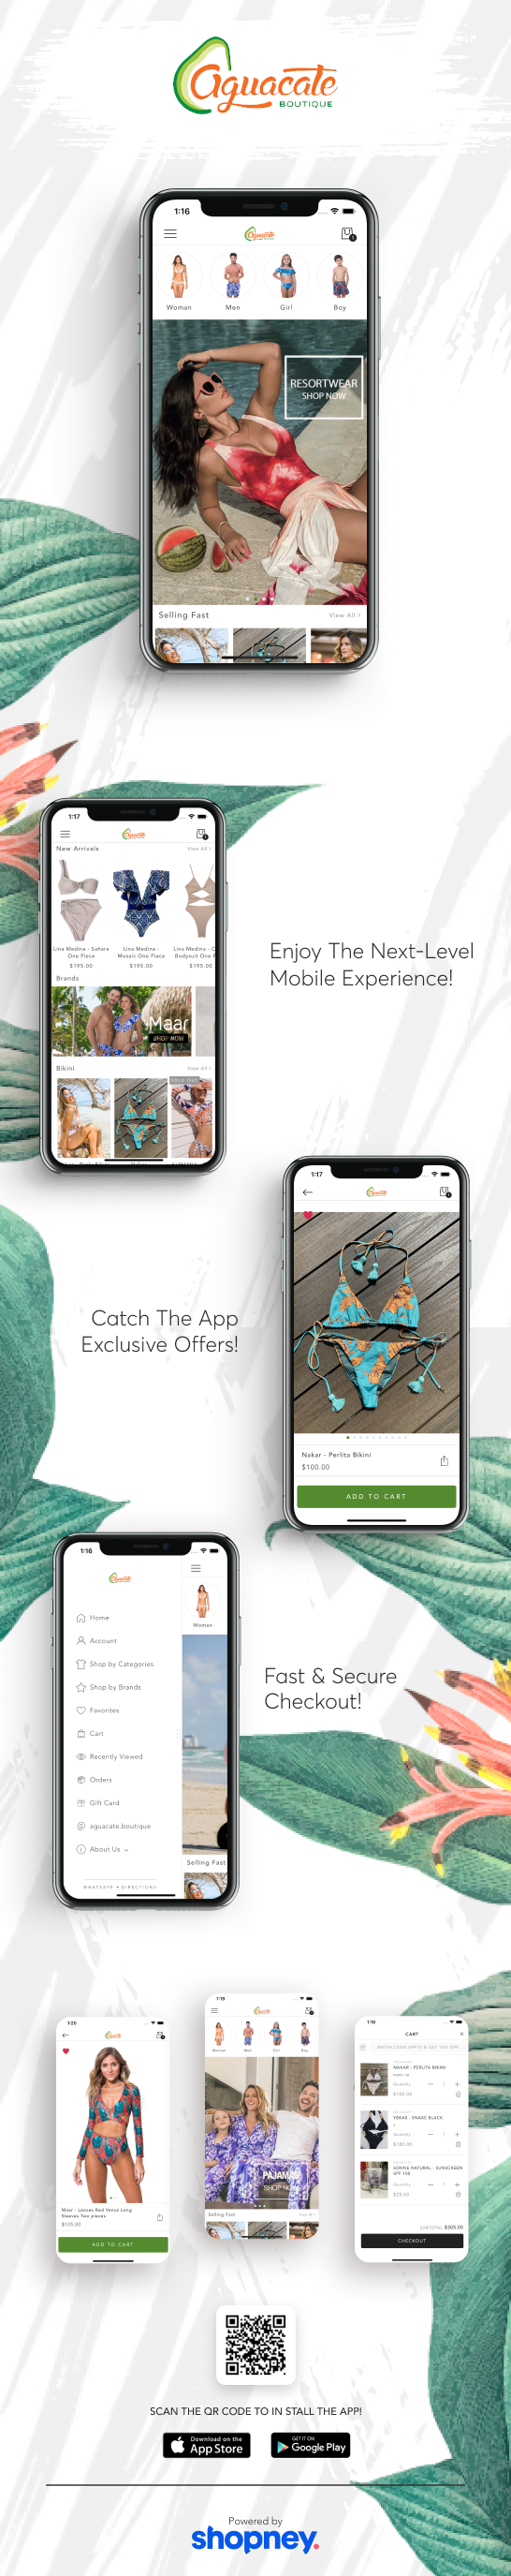 the mobile app design of Aguacate Boutique app